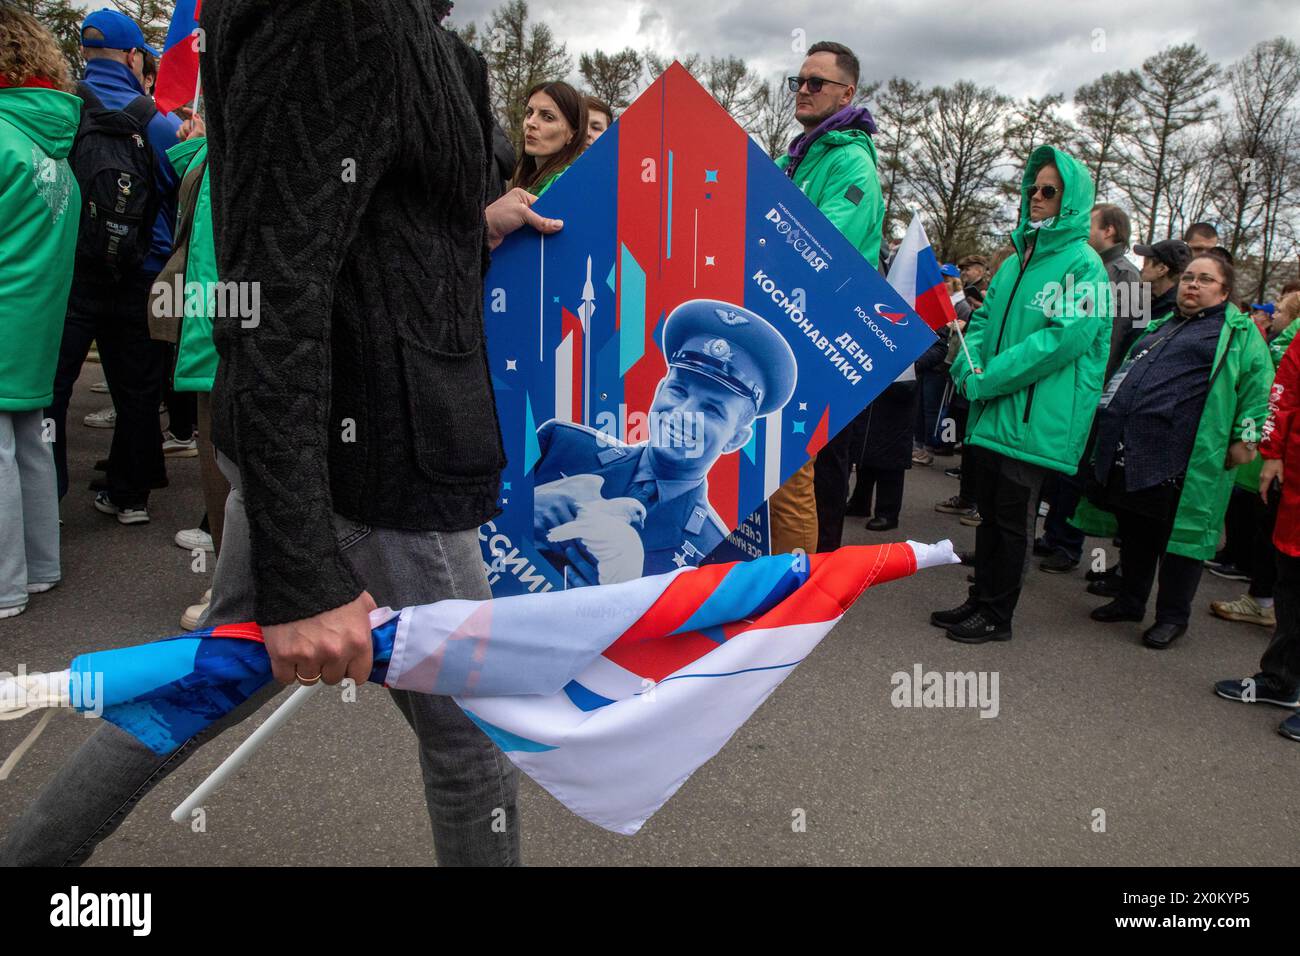 Moscow, Russia. 12th of April, 2024. A man holds a poster with a prortait of a Soviet pilot and cosmonaut Yuri Gagarin on Cosmonautics Day during the Russia Expo international forum and exhibition at the VDNKh Exhibition Centre in Moscow, Russia. Credit: Nikolay Vinokurov/Alamy Live News Stock Photo